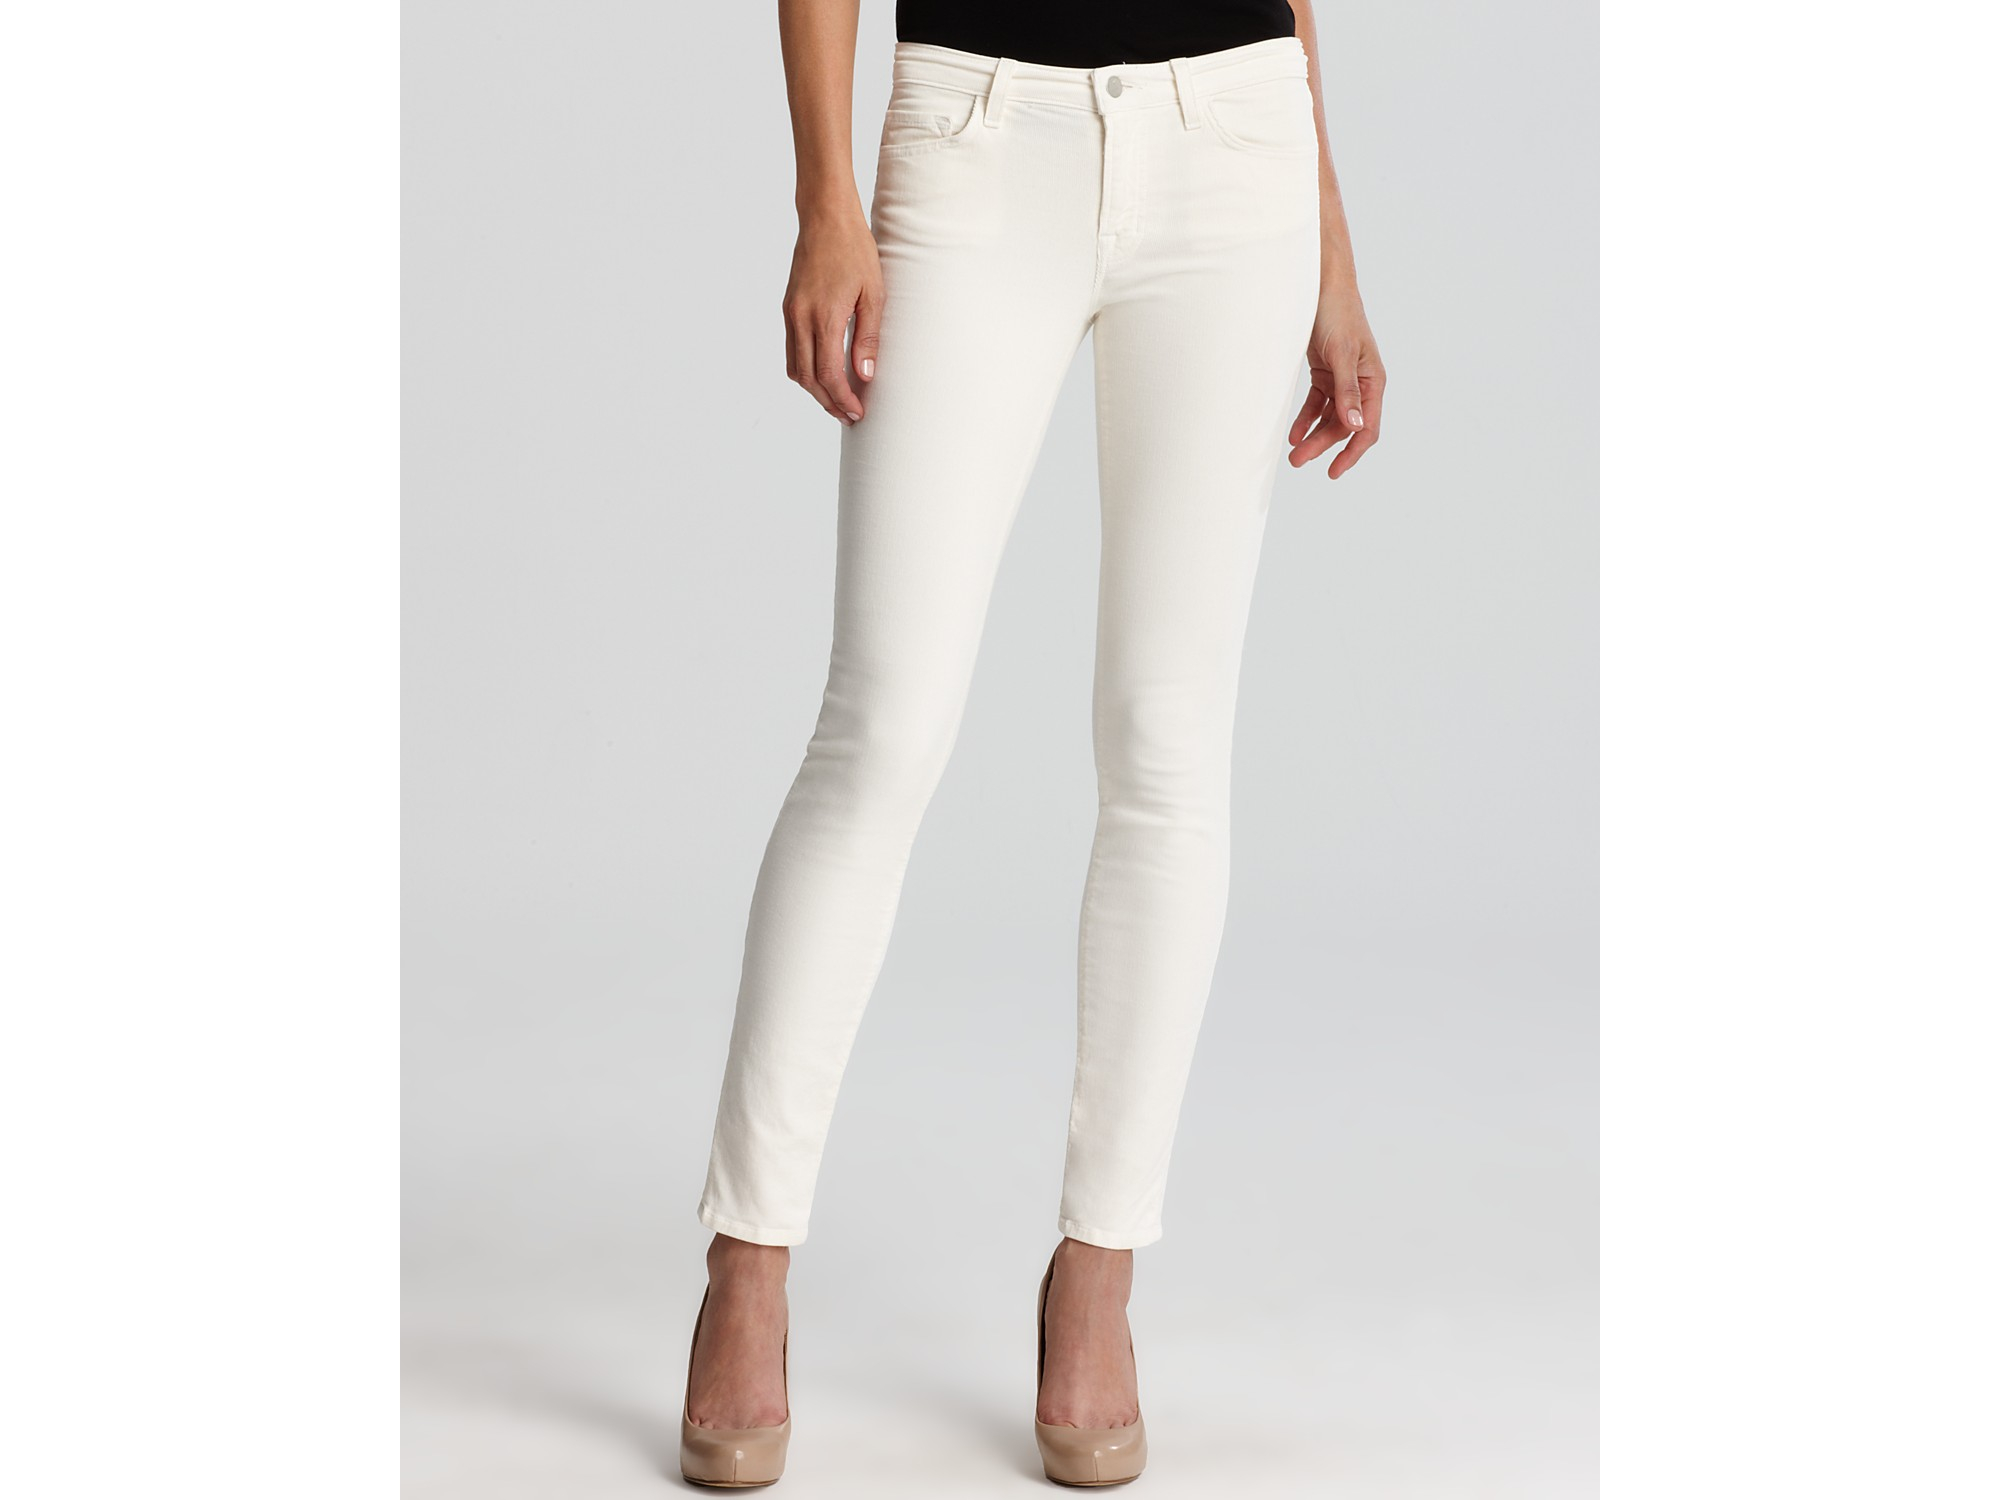 Lyst J Brand Pants Mid Rise Skinny Corduroy In White In White Size